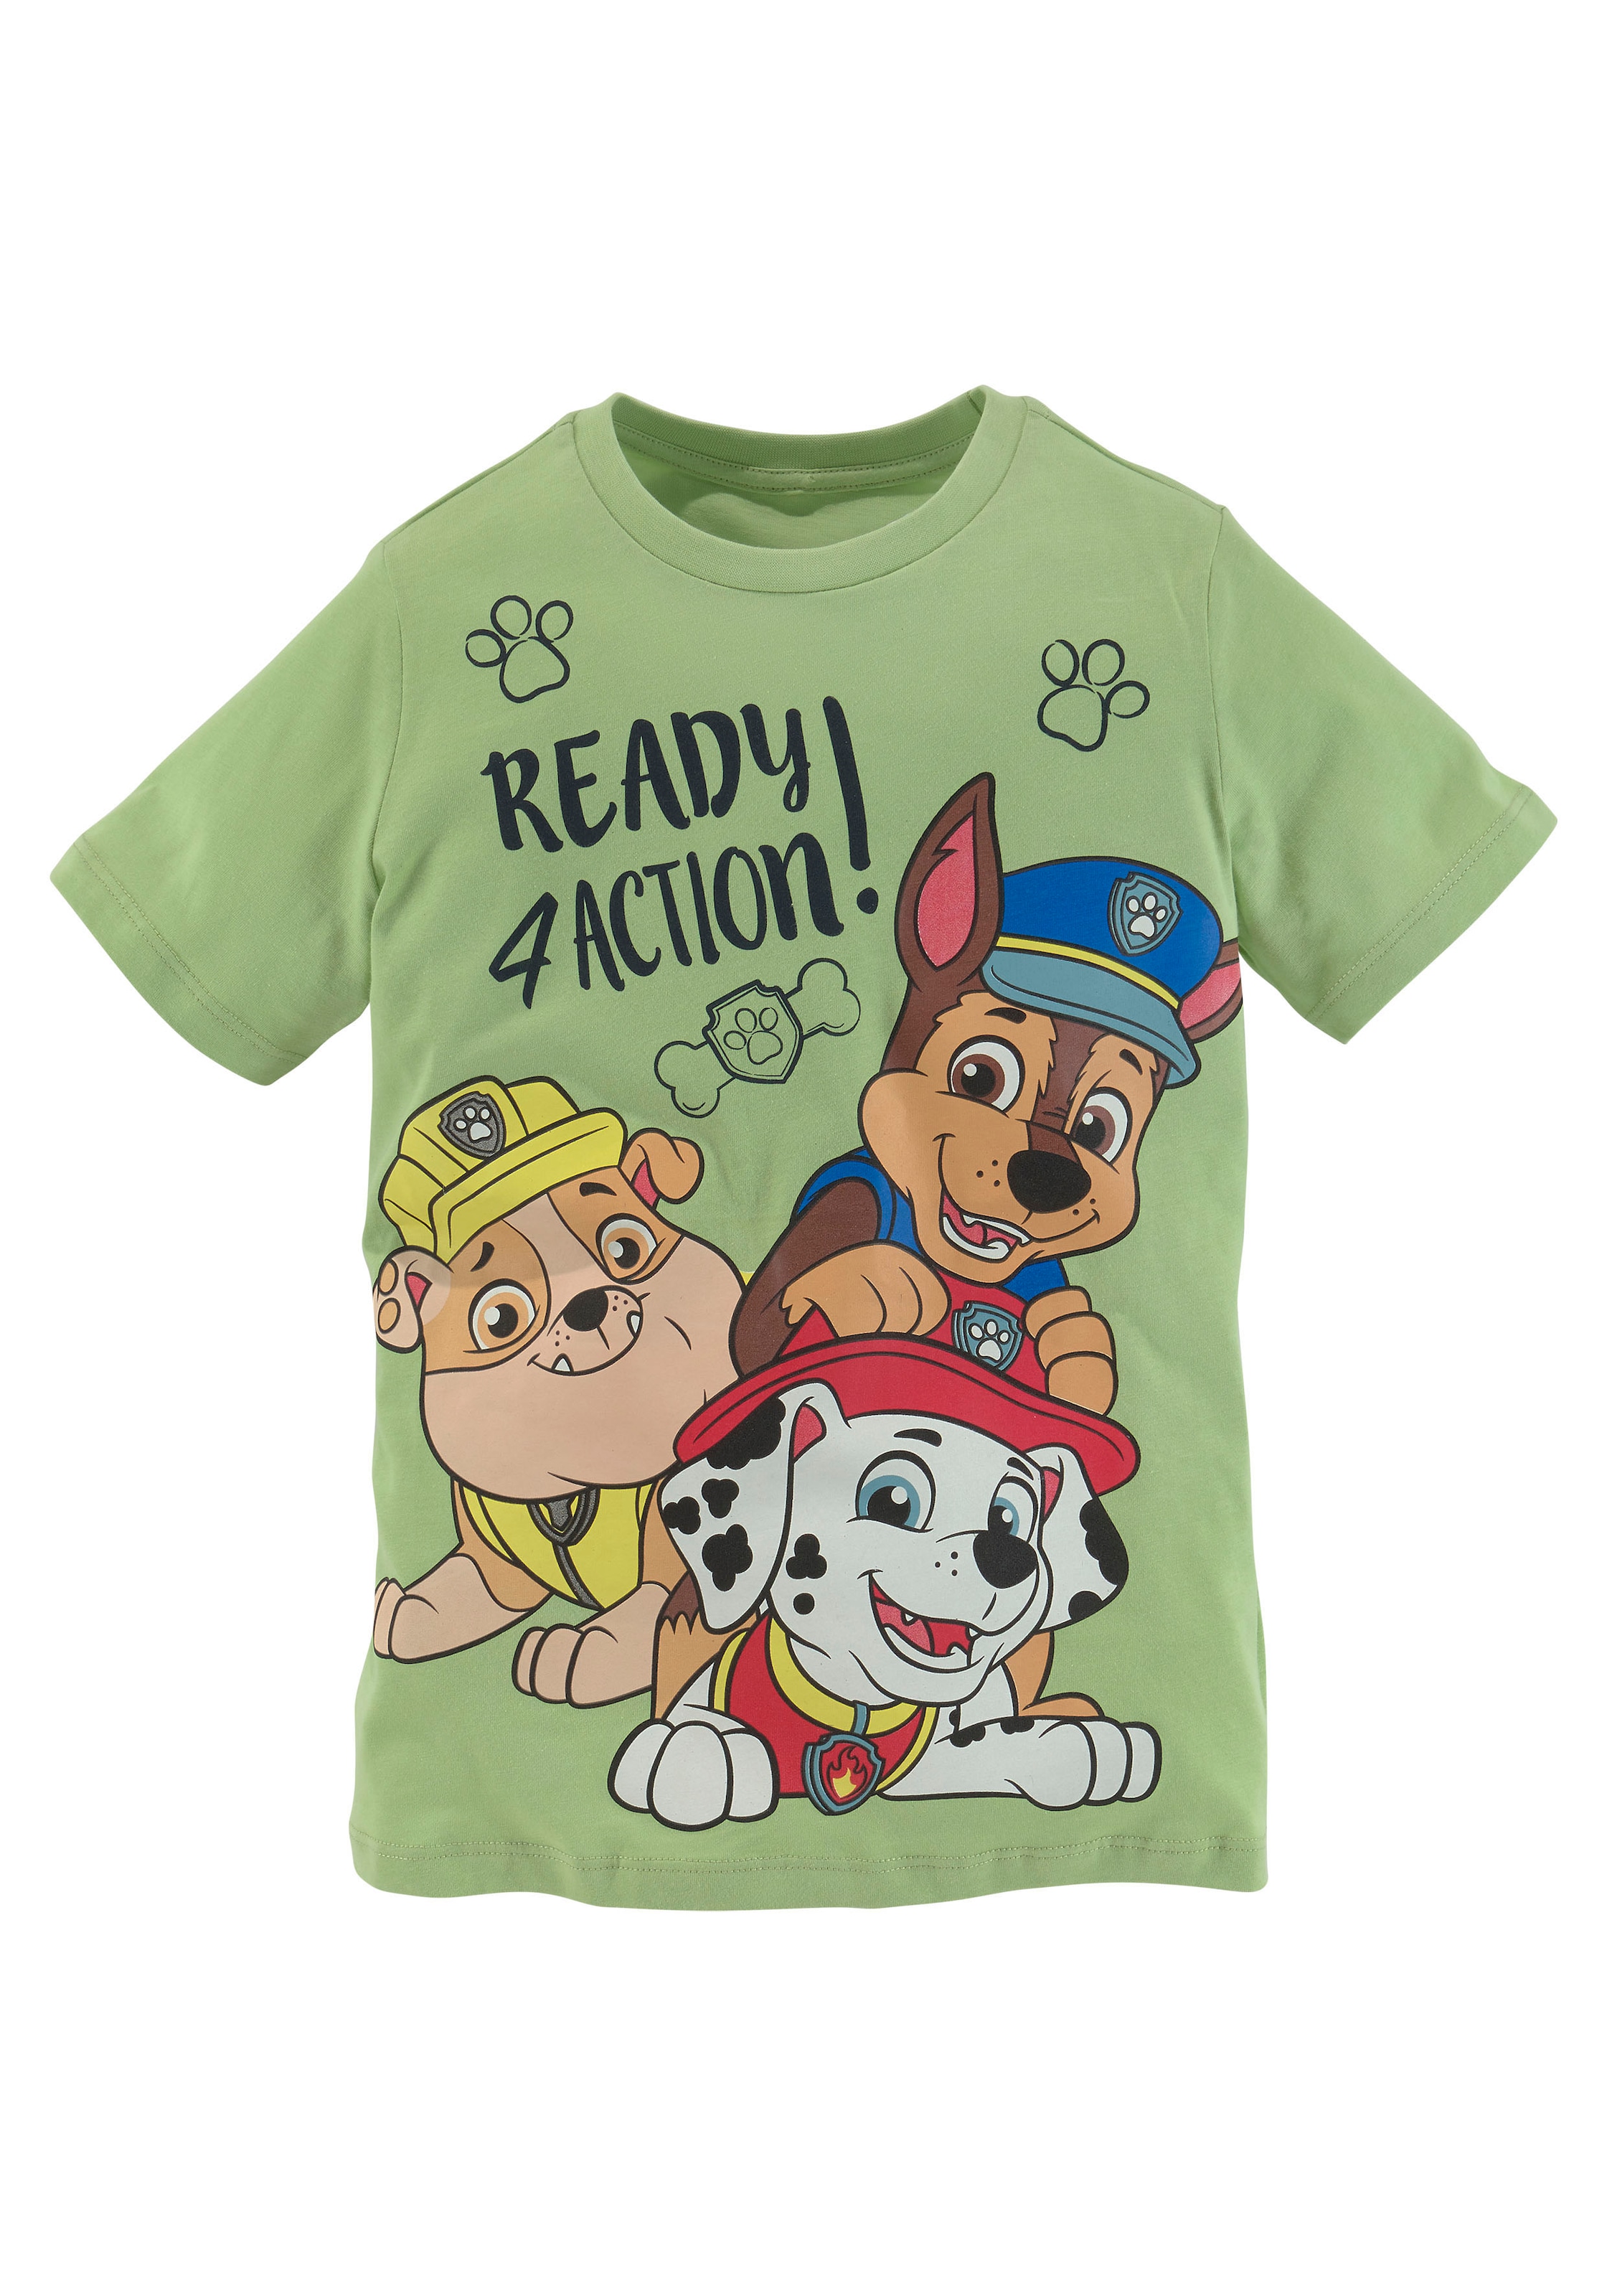 PAW PATROL T-Shirt »Ready OTTO action!« 4 online bei